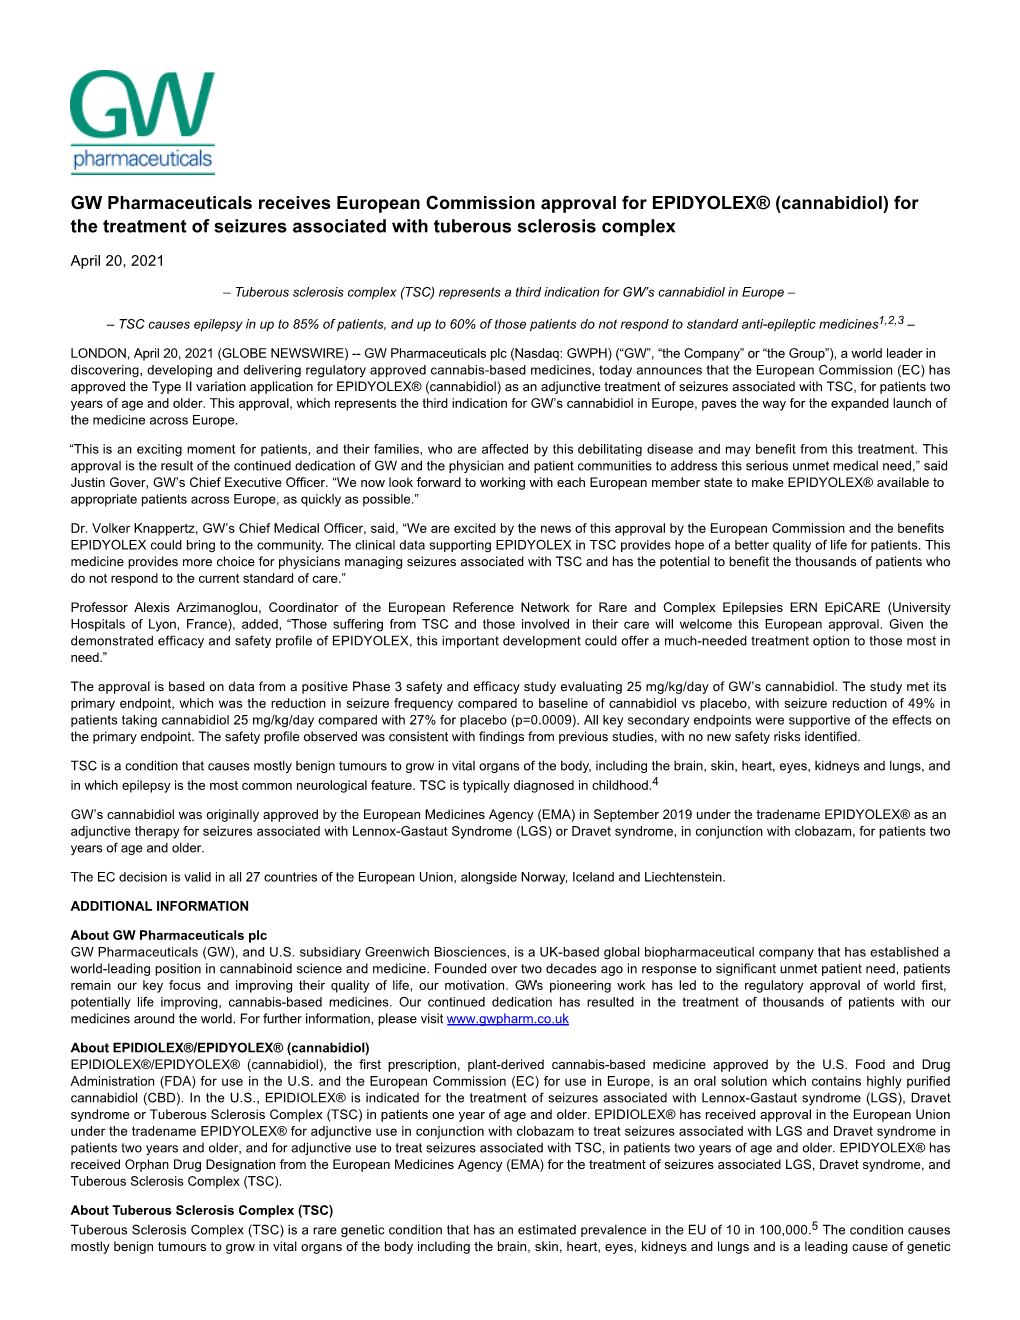 GW Pharmaceuticals Receives European Commission Approval for EPIDYOLEX® (Cannabidiol) for the Treatment of Seizures Associated with Tuberous Sclerosis Complex